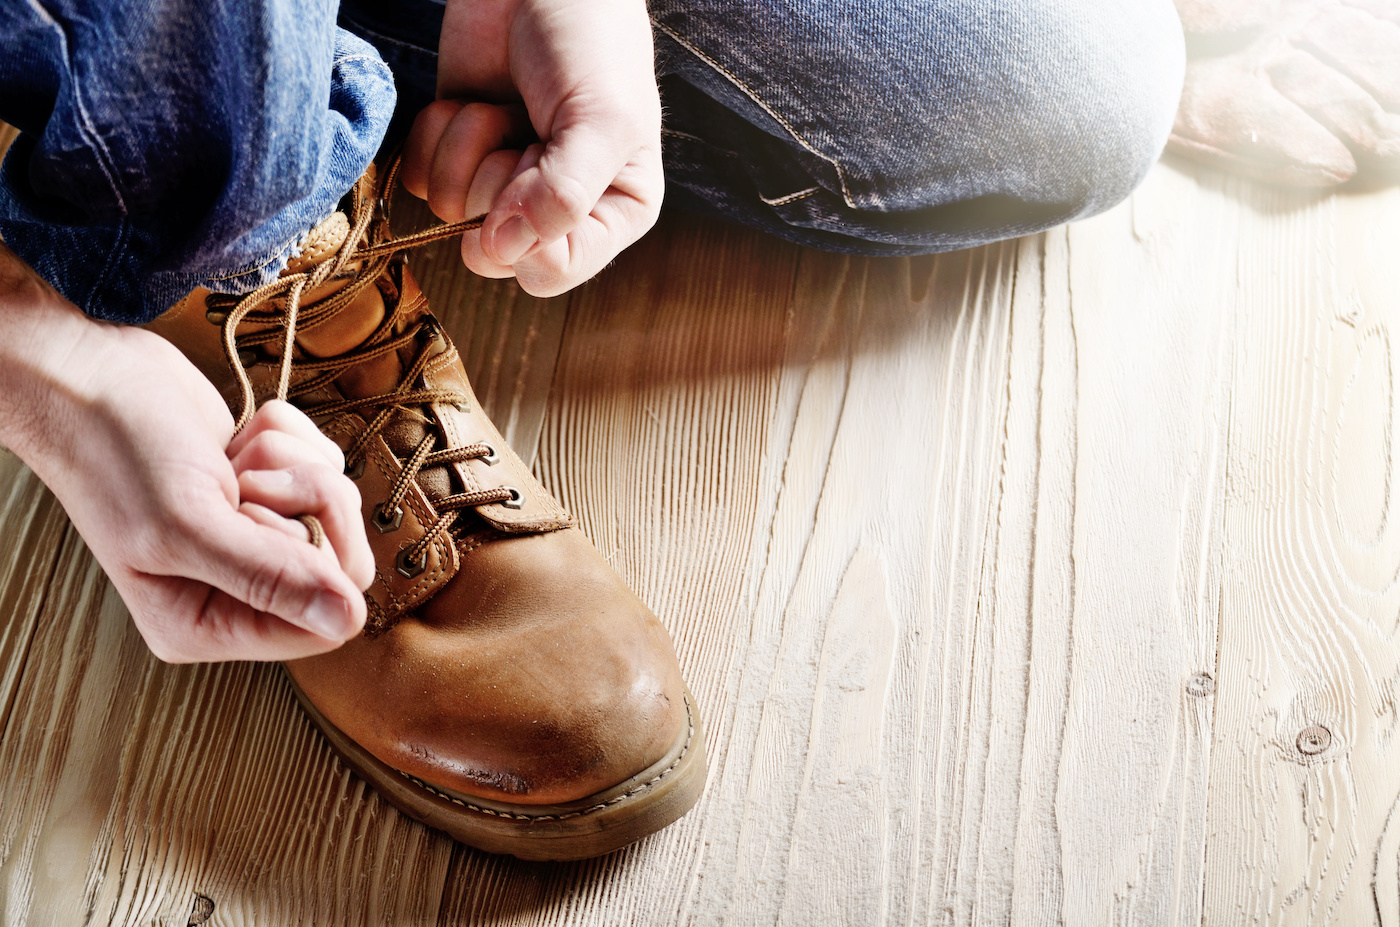 Carpenter in blue jeans tying shoelaces of yellow work boots on on wooden floor